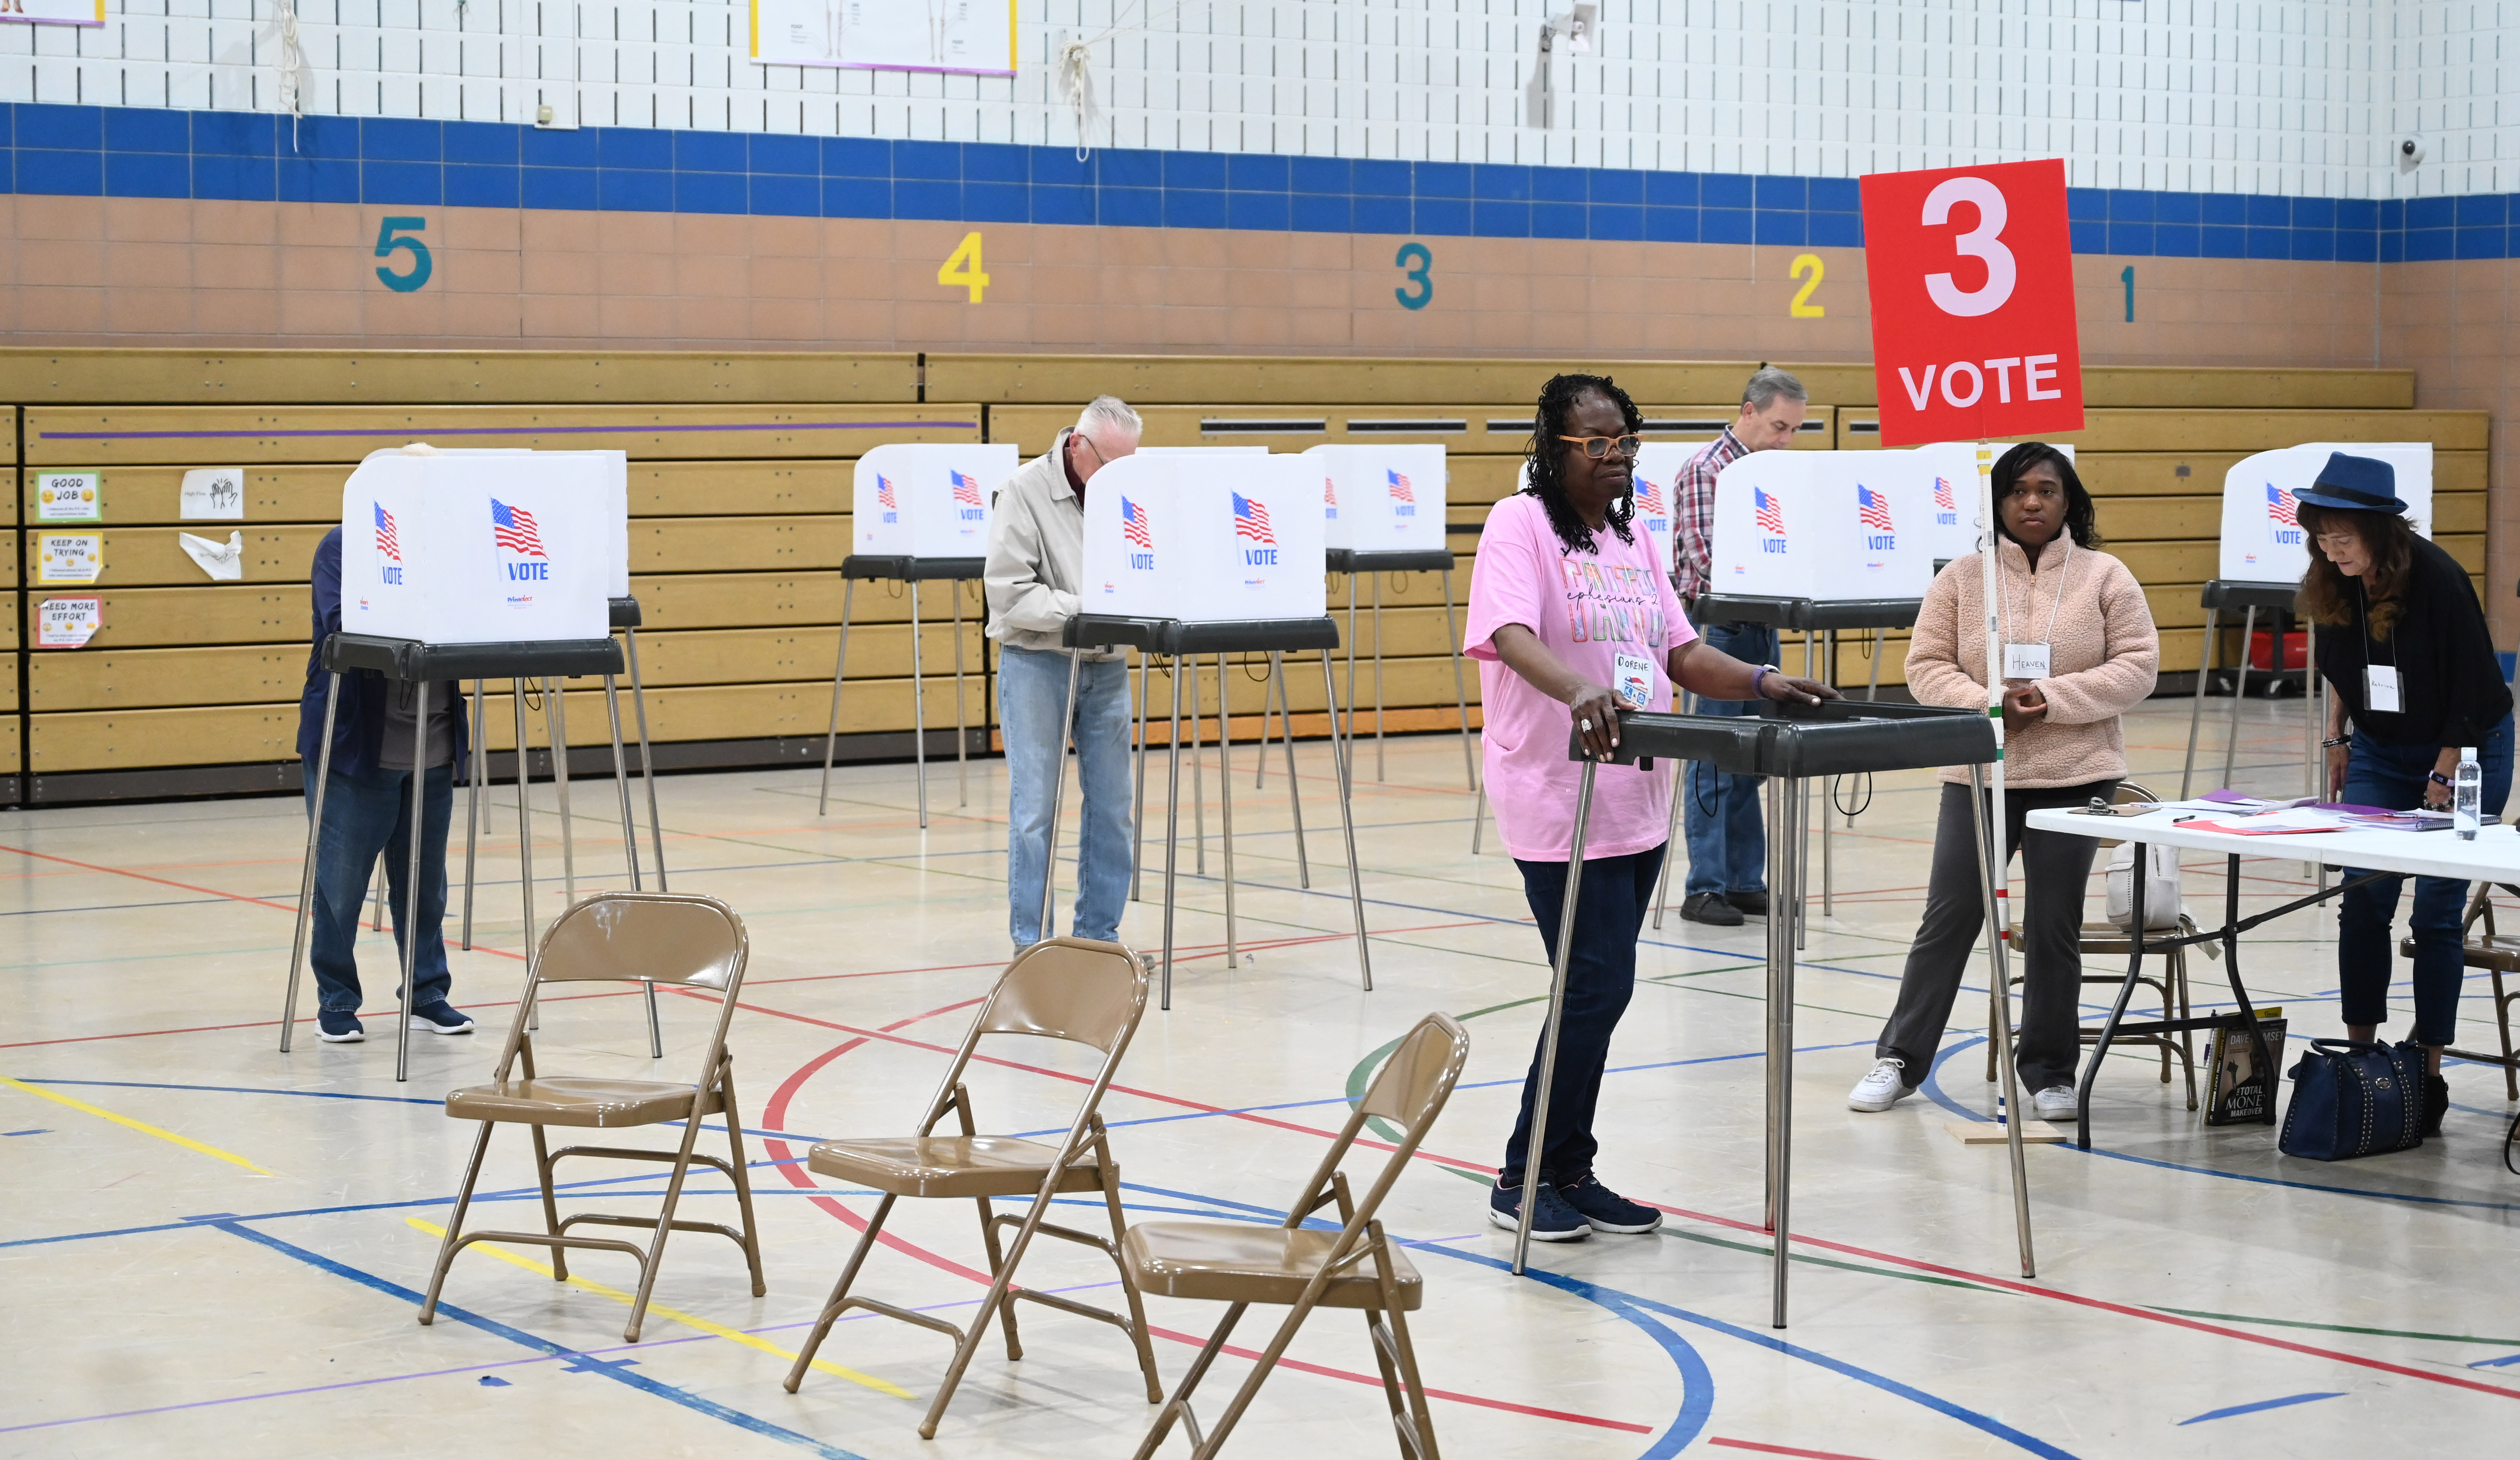 Voters fill out their ballots at the polling location at Church Creek Elementary for Maryland's primary election on Tuesday. (Brian Krista/staff photo)